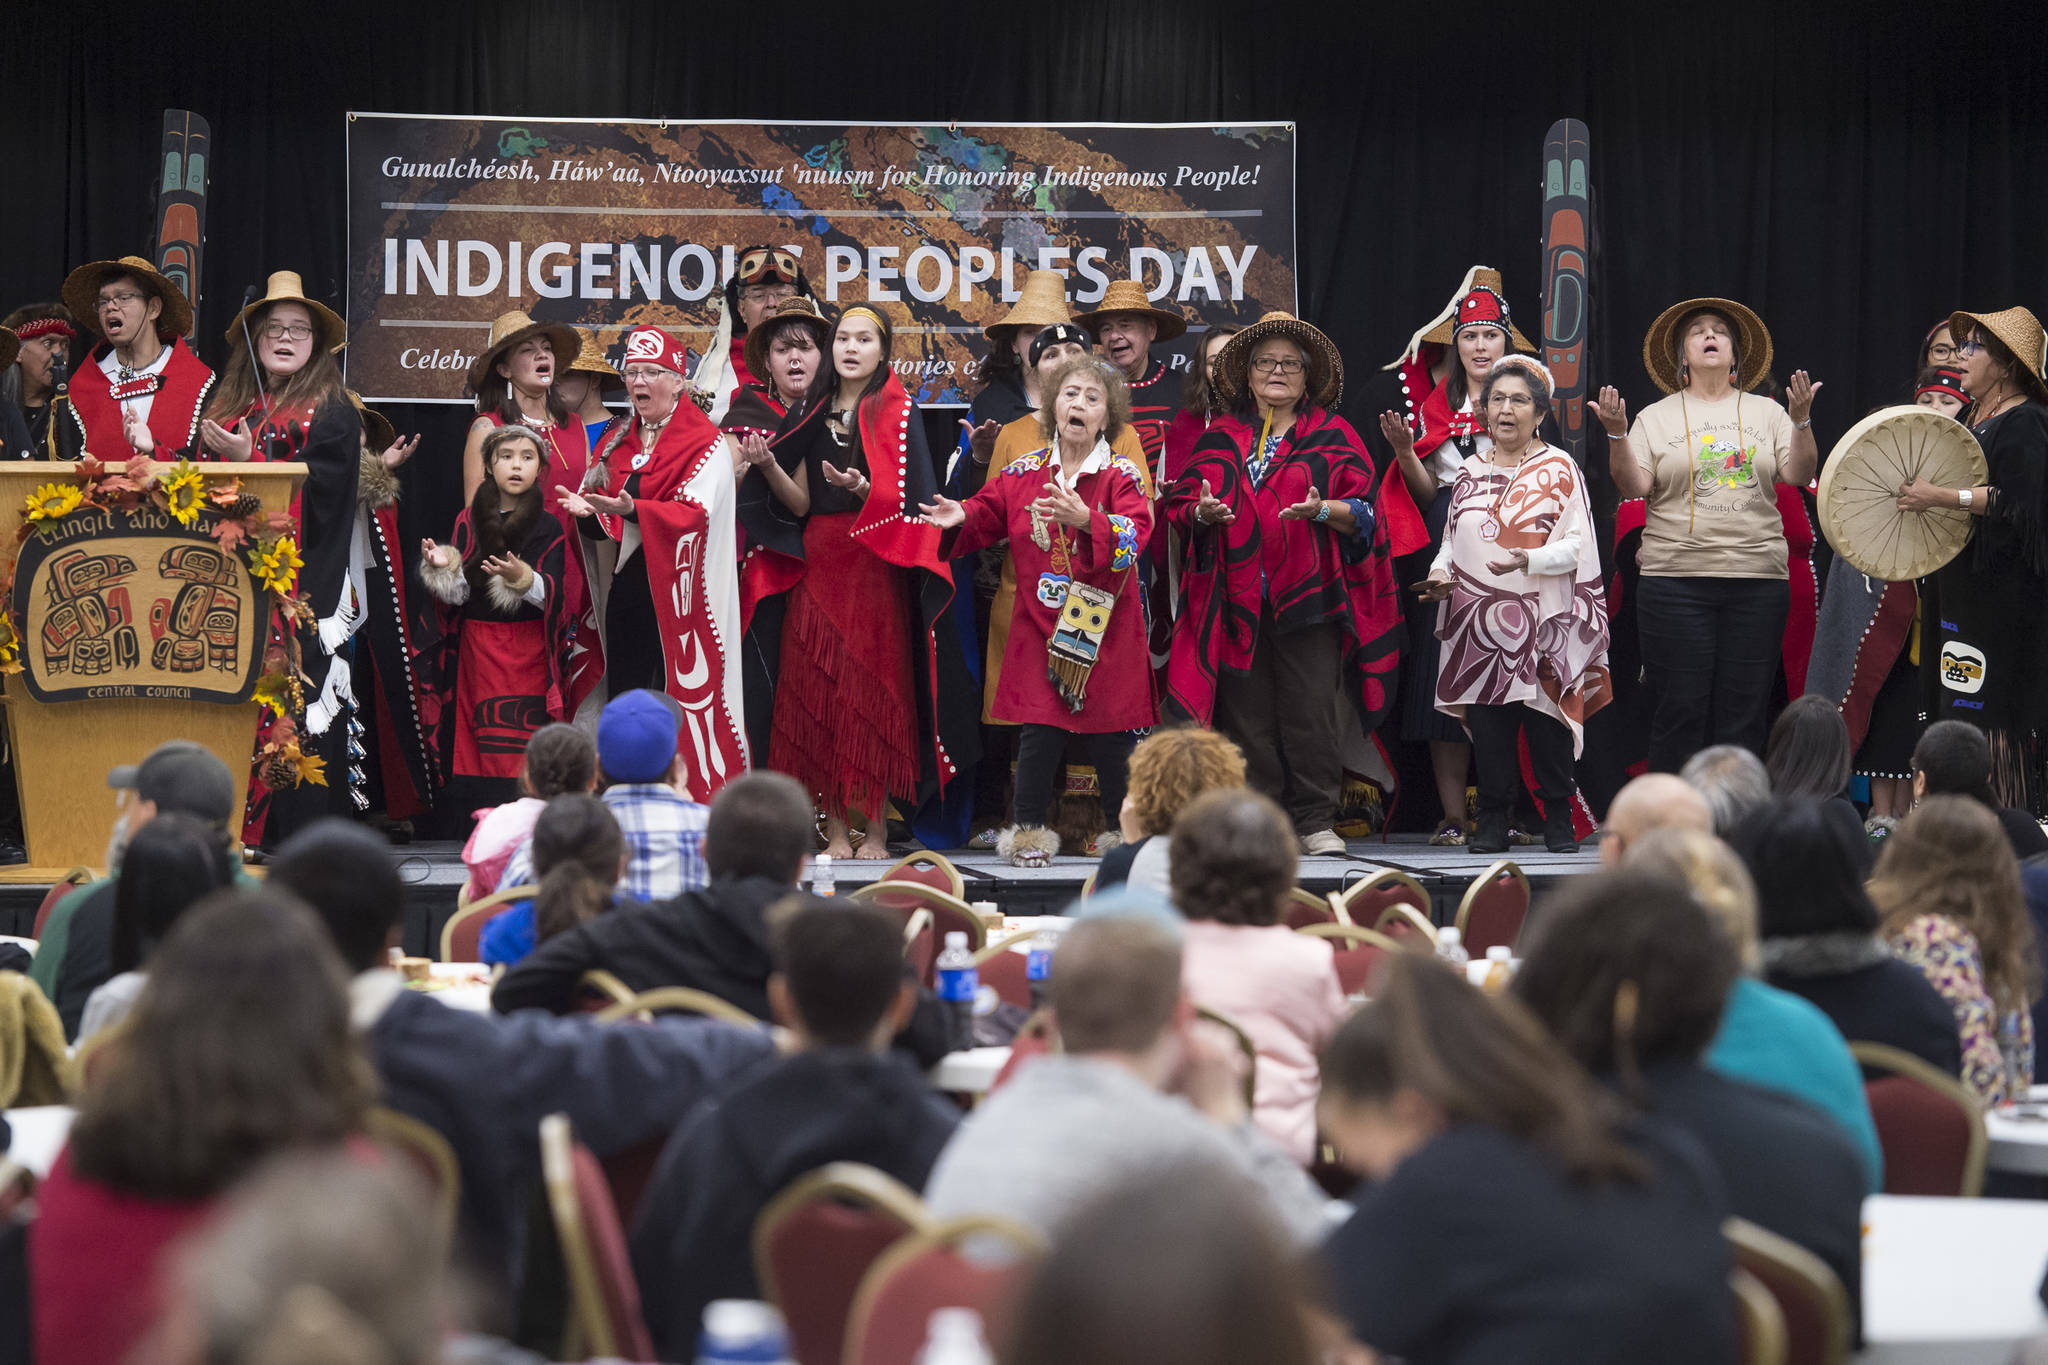 The Yees Ku Oo Dancers perform on stage during Indigenous Peoples Day celebrations at the Elizabeth Peratrovich Hall on Monday, Oct. 8, 2018. (Michael Penn | Juneau Empire)